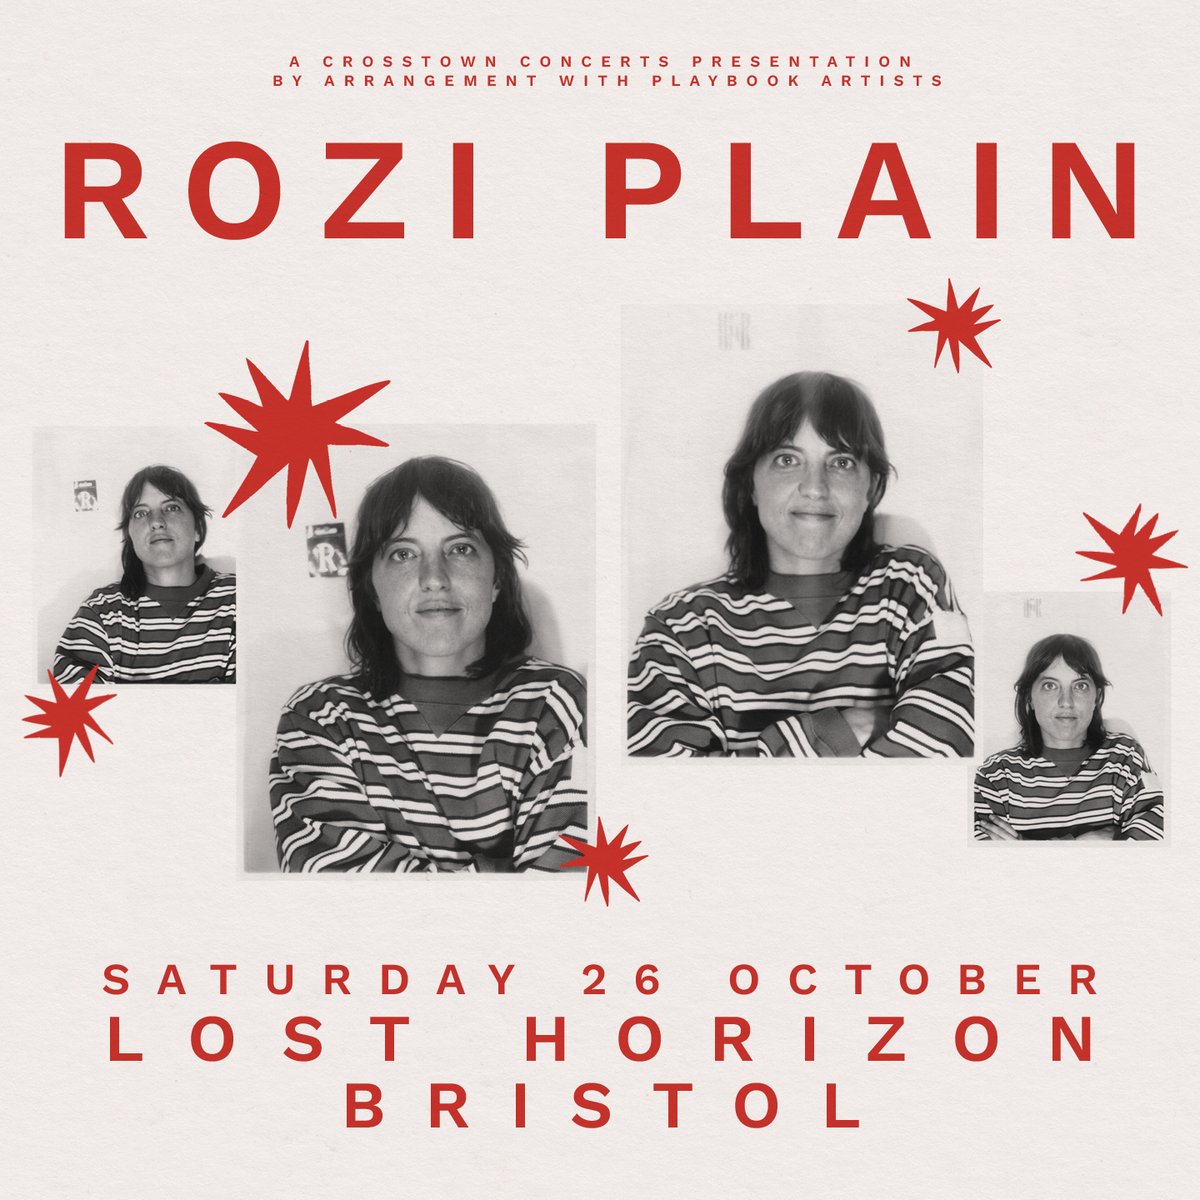 Tickets are on sale now for @ROZIPLAIN at @LostHorizonHQ Bristol. crosstownconcerts.seetickets.com/event/rozi-pla…